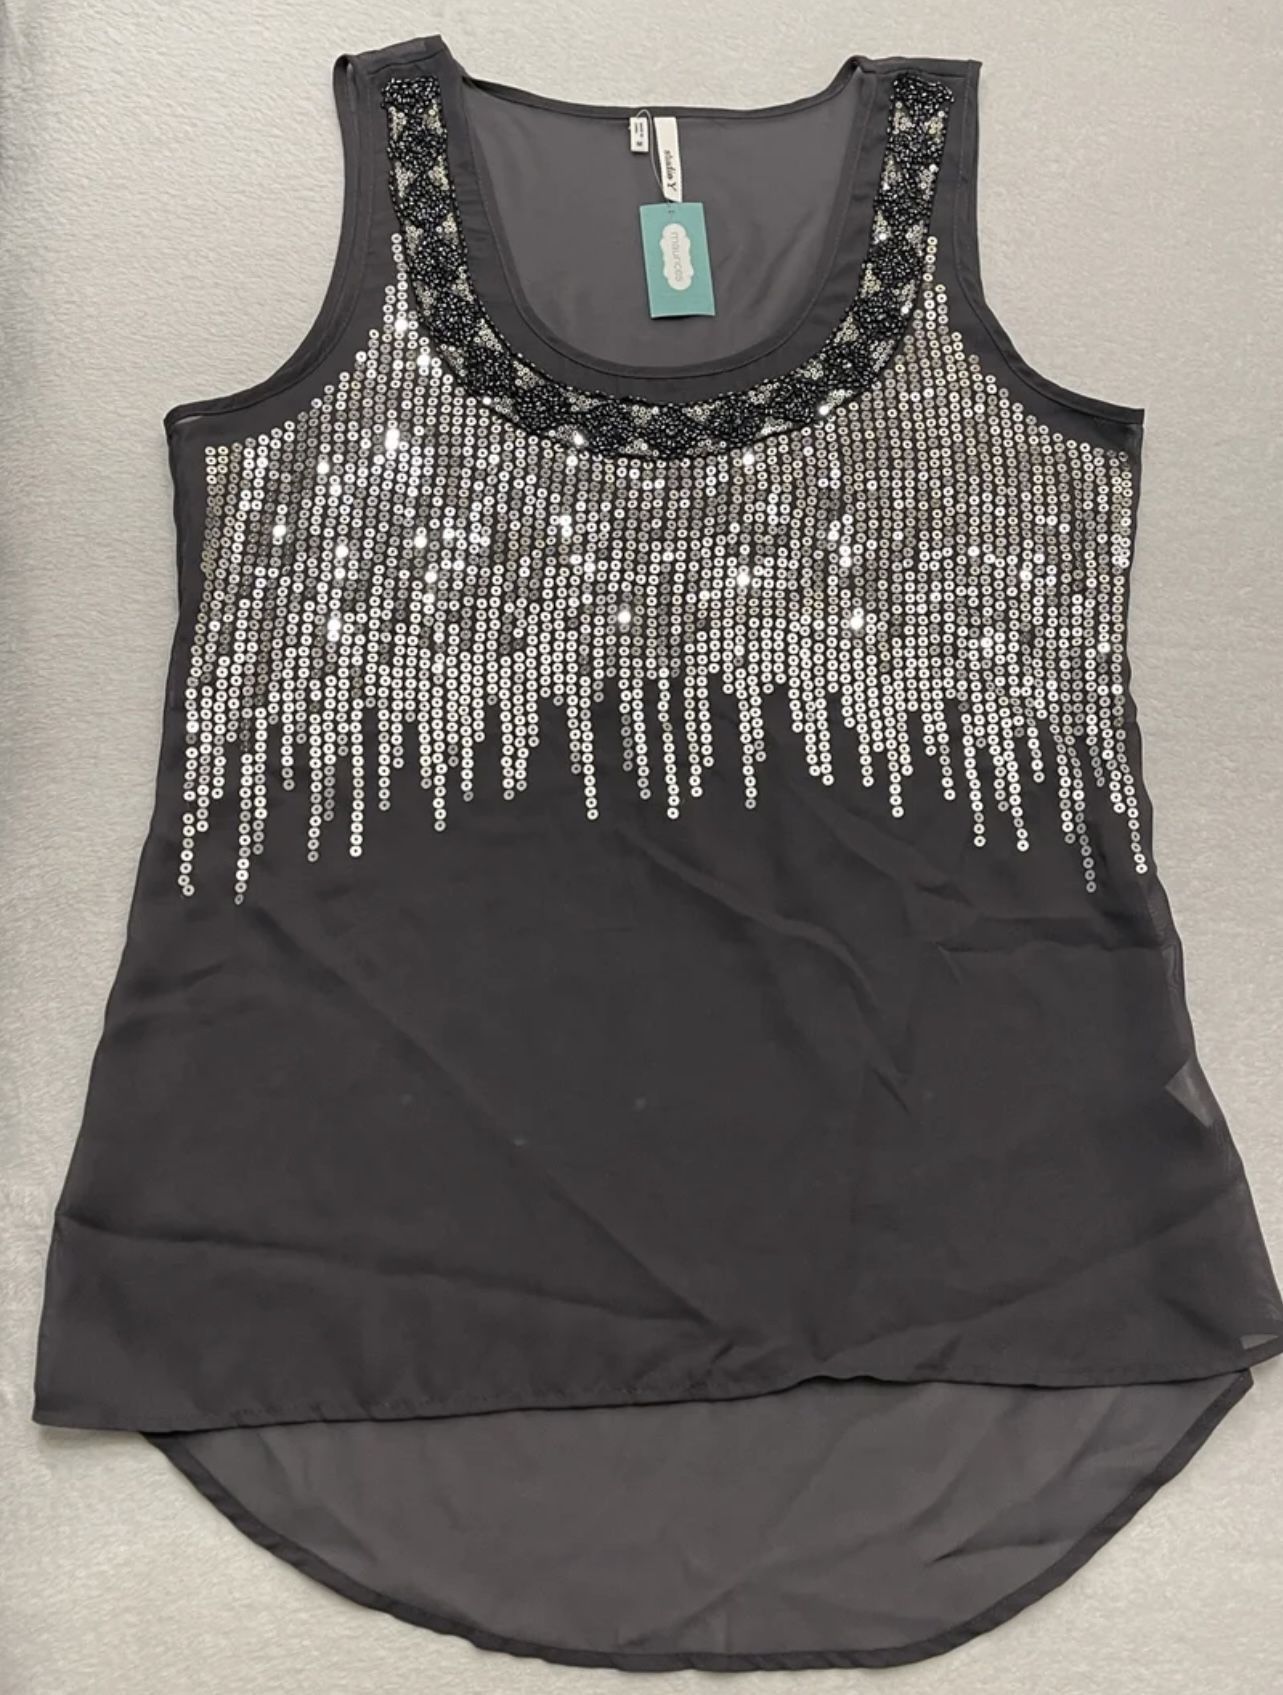 NWT Maurice’s  Sequin Tank Top